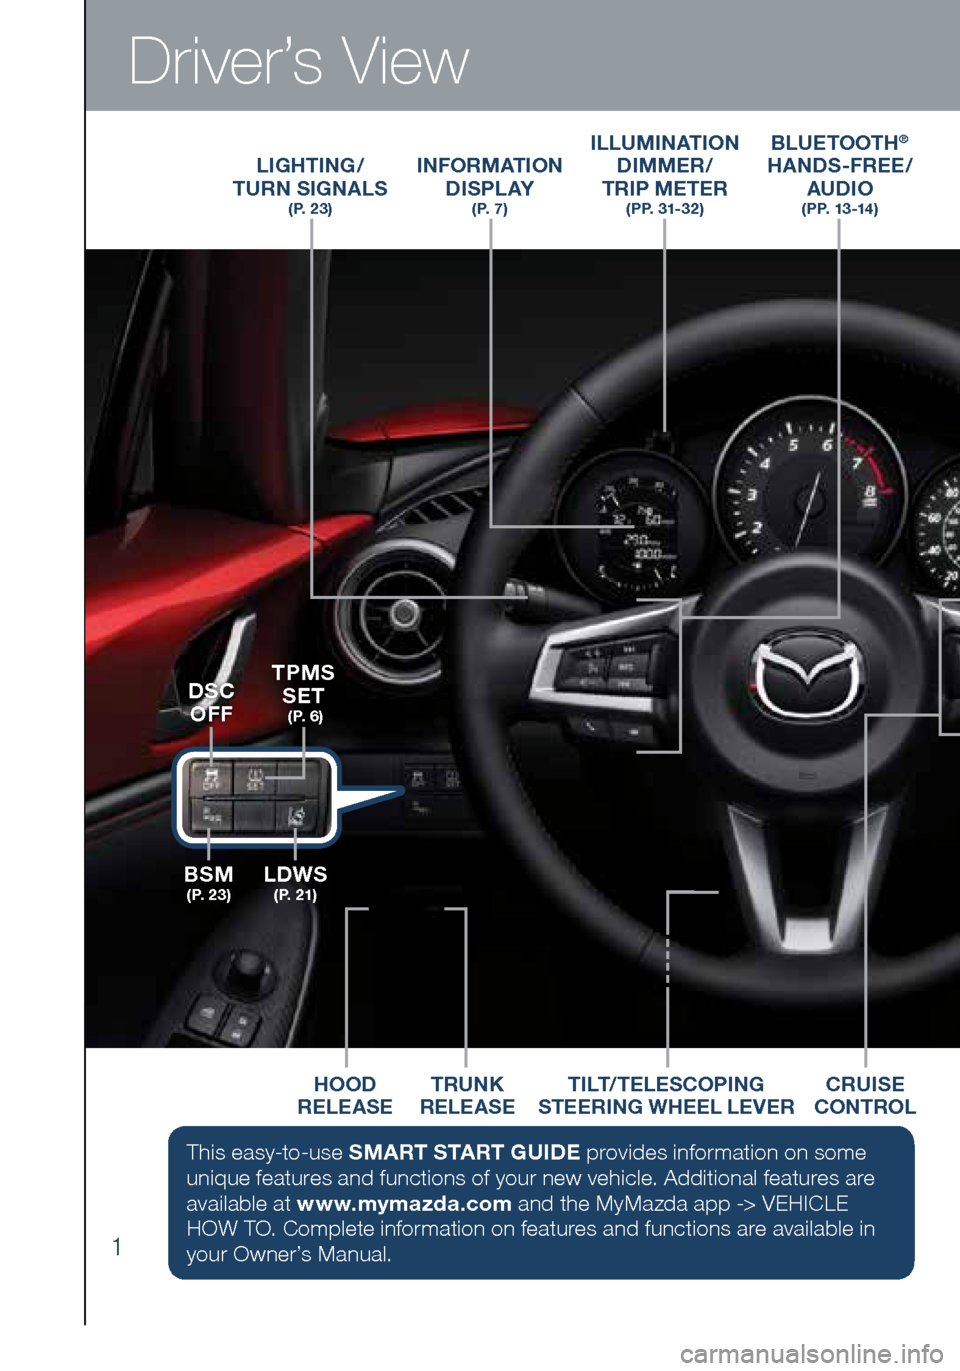 MAZDA MODEL MX-5 2016  Smart Start Guide (in English) 1
Driver’s View
ILLUMINATION DIMMER/  
TRIP METER
(PP. 31-32)
LIGHTING/   
TURN SIGNALS  
( P.  2 3 )
BLUETOOTH®  
HANDS-FREE/  
AUDIO
   ( P P.  1 3 -14 )
INFORMATION 
D I S P L AY  
( P.  7 )
HOO